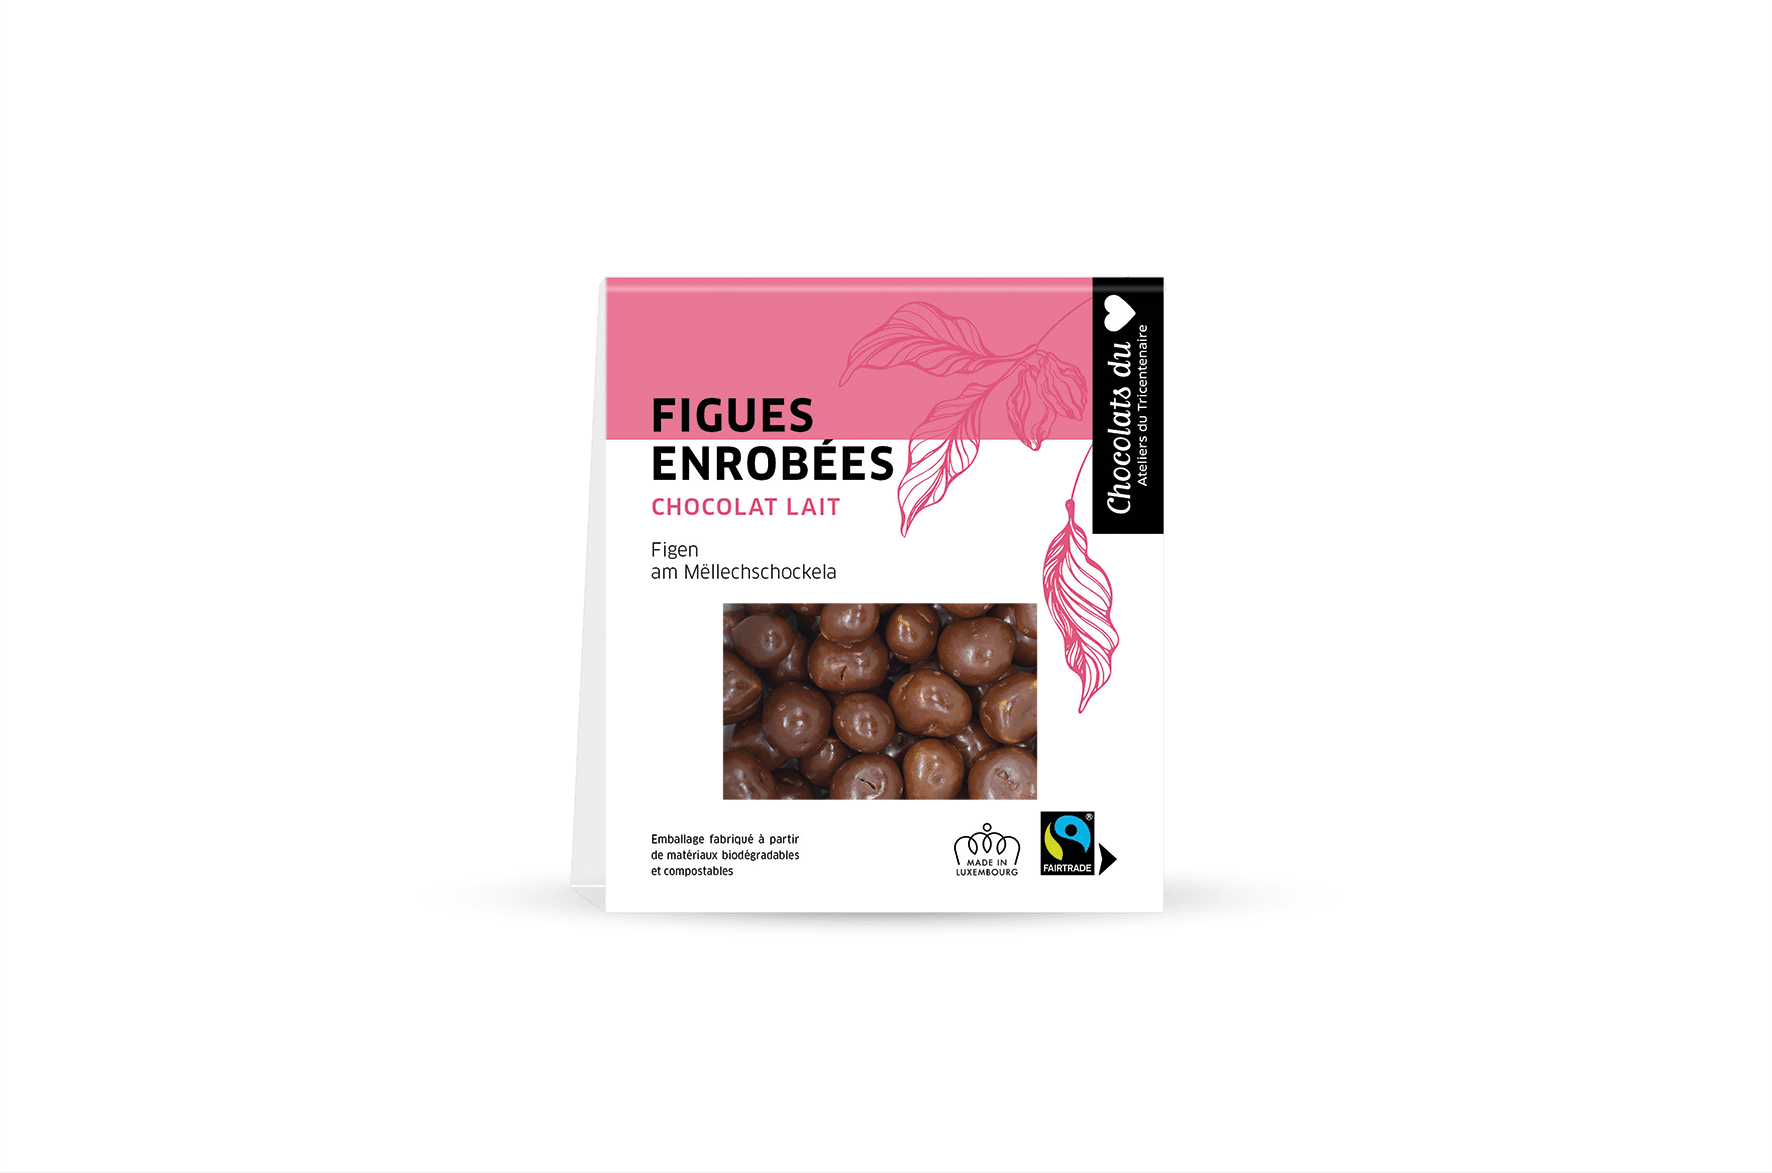 Figs coated with Fairtrade milk chocolate (80g)